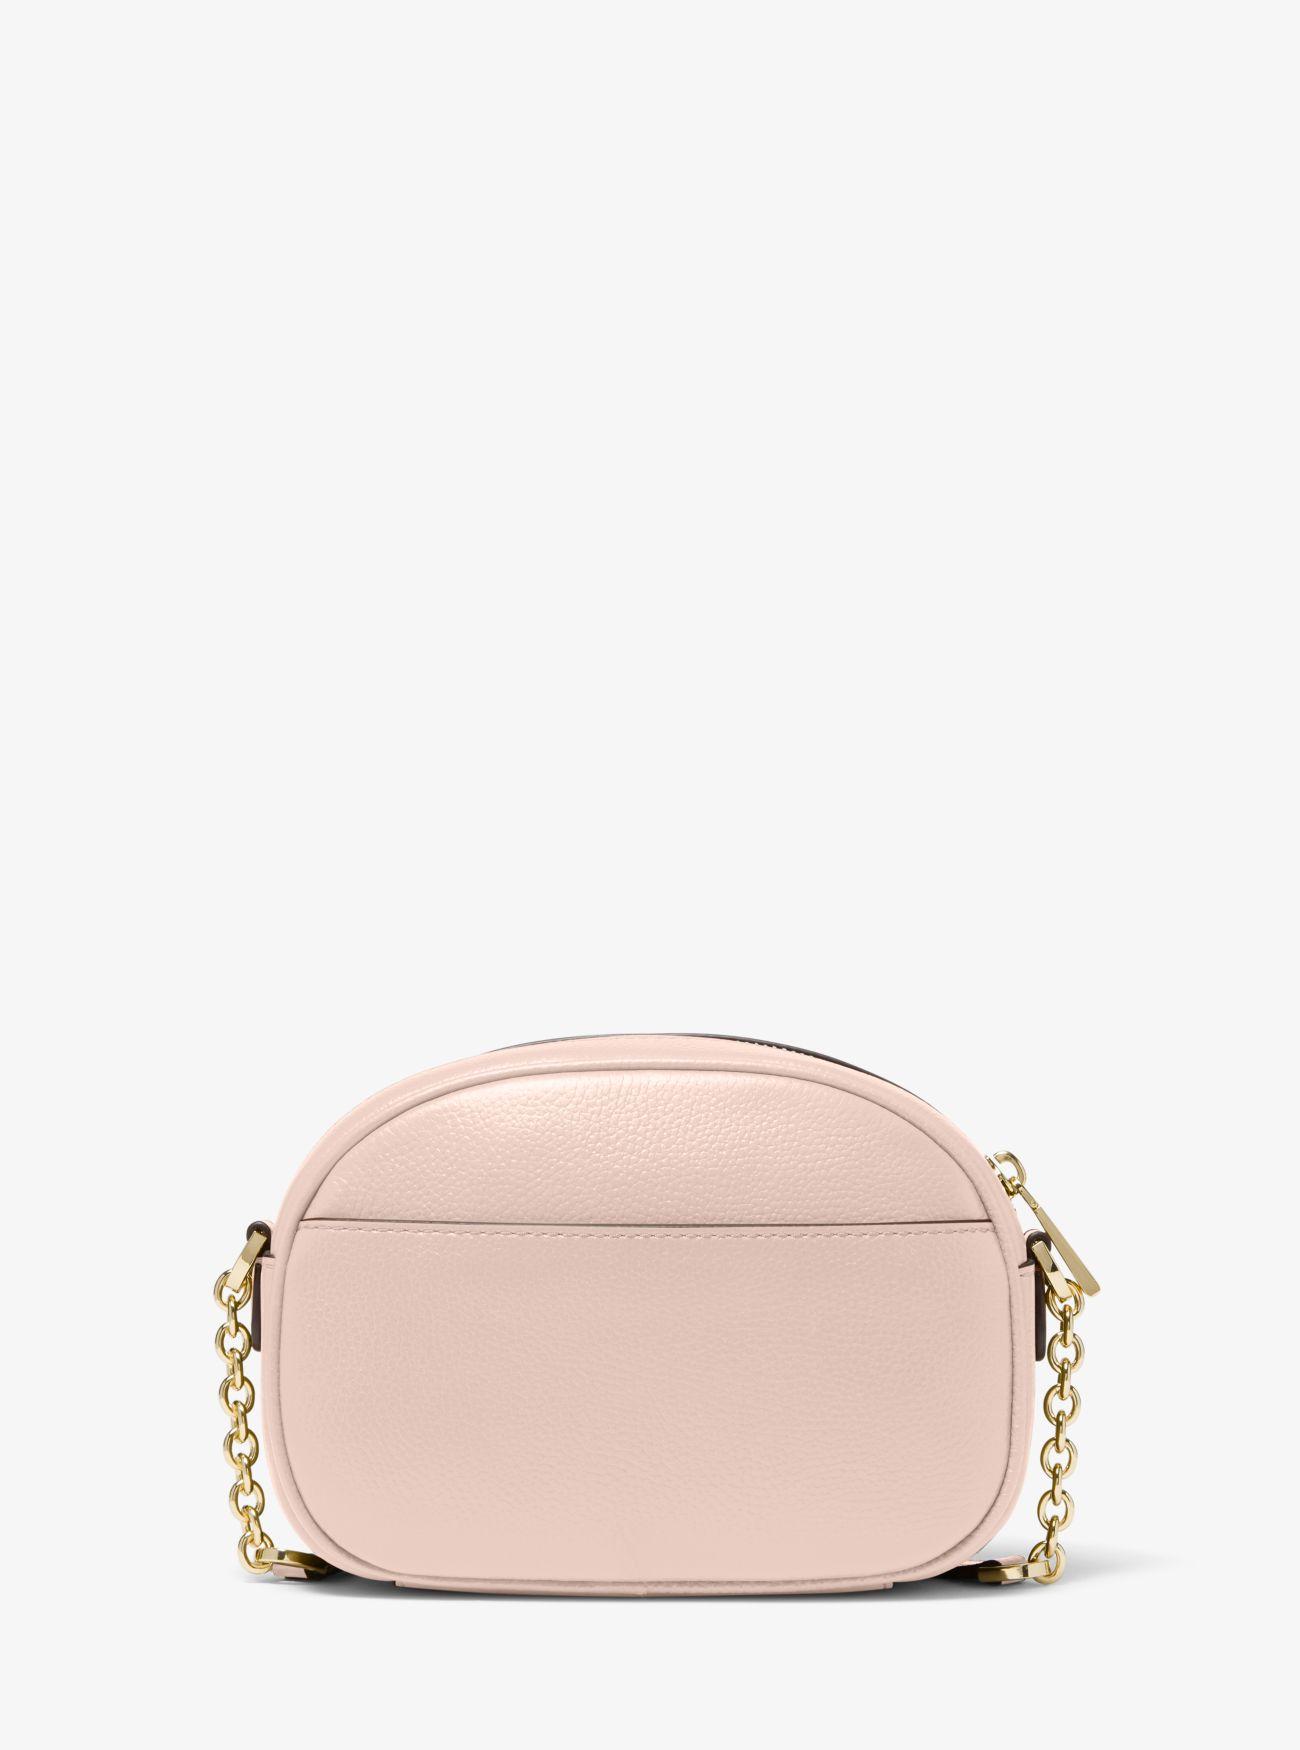 Best Pink Mk Purse for sale in Dothan, Alabama for 2024